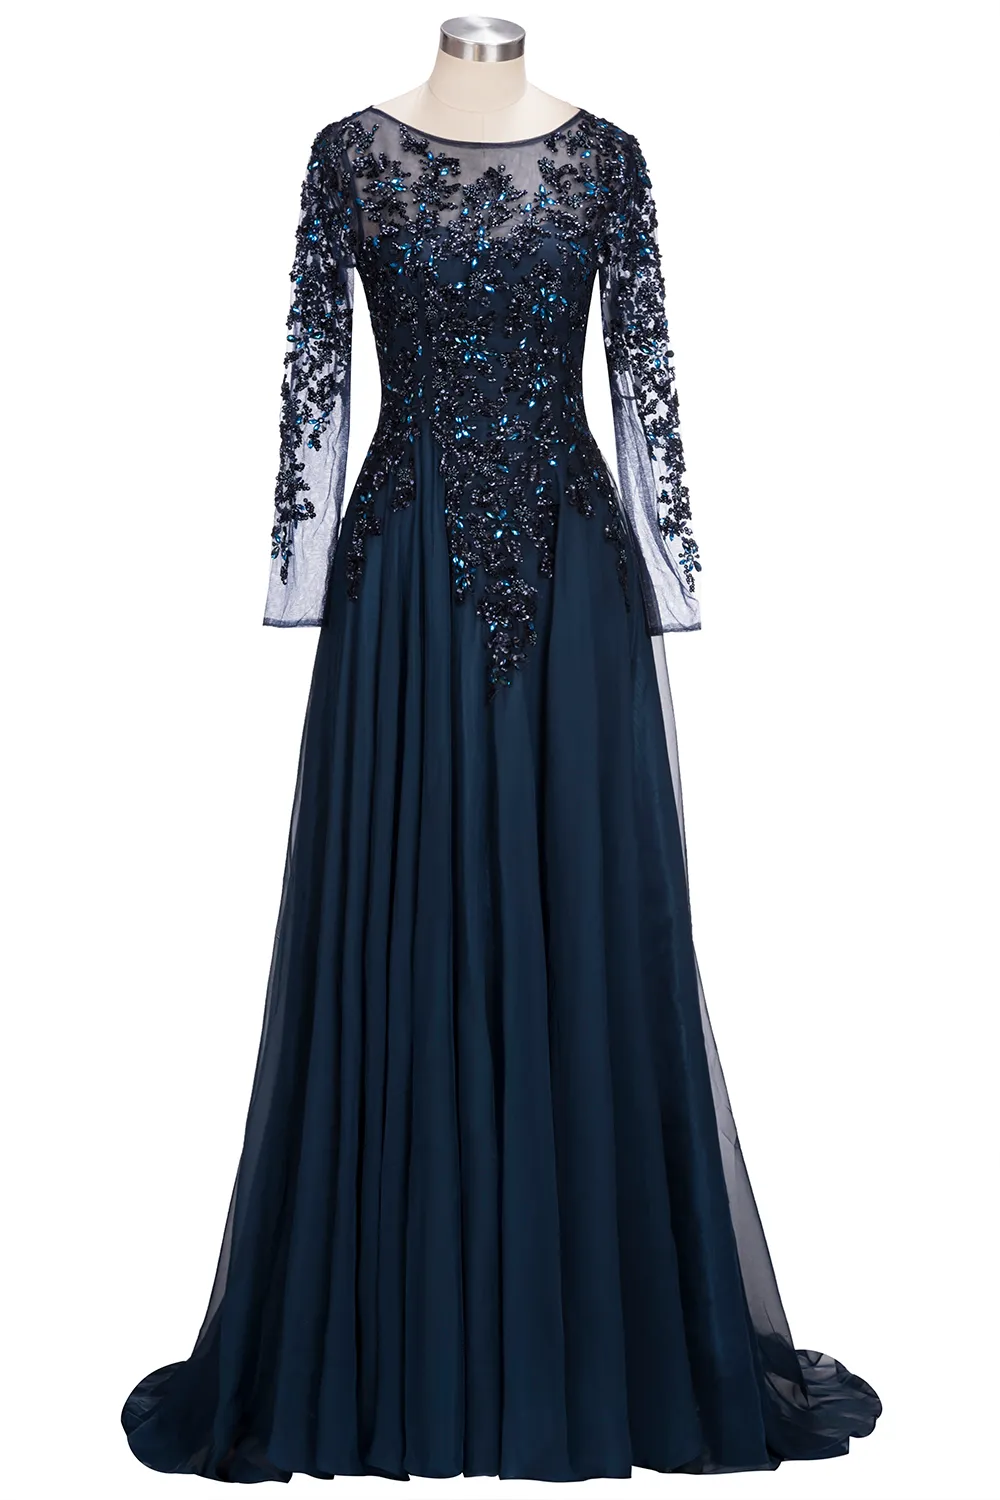 Navy Blue Sheer Long Sleeves Chiffon Mother Of The Bride Dresses Beaded Stones Floor Length Formal Party Evening Dresses BA91351405234